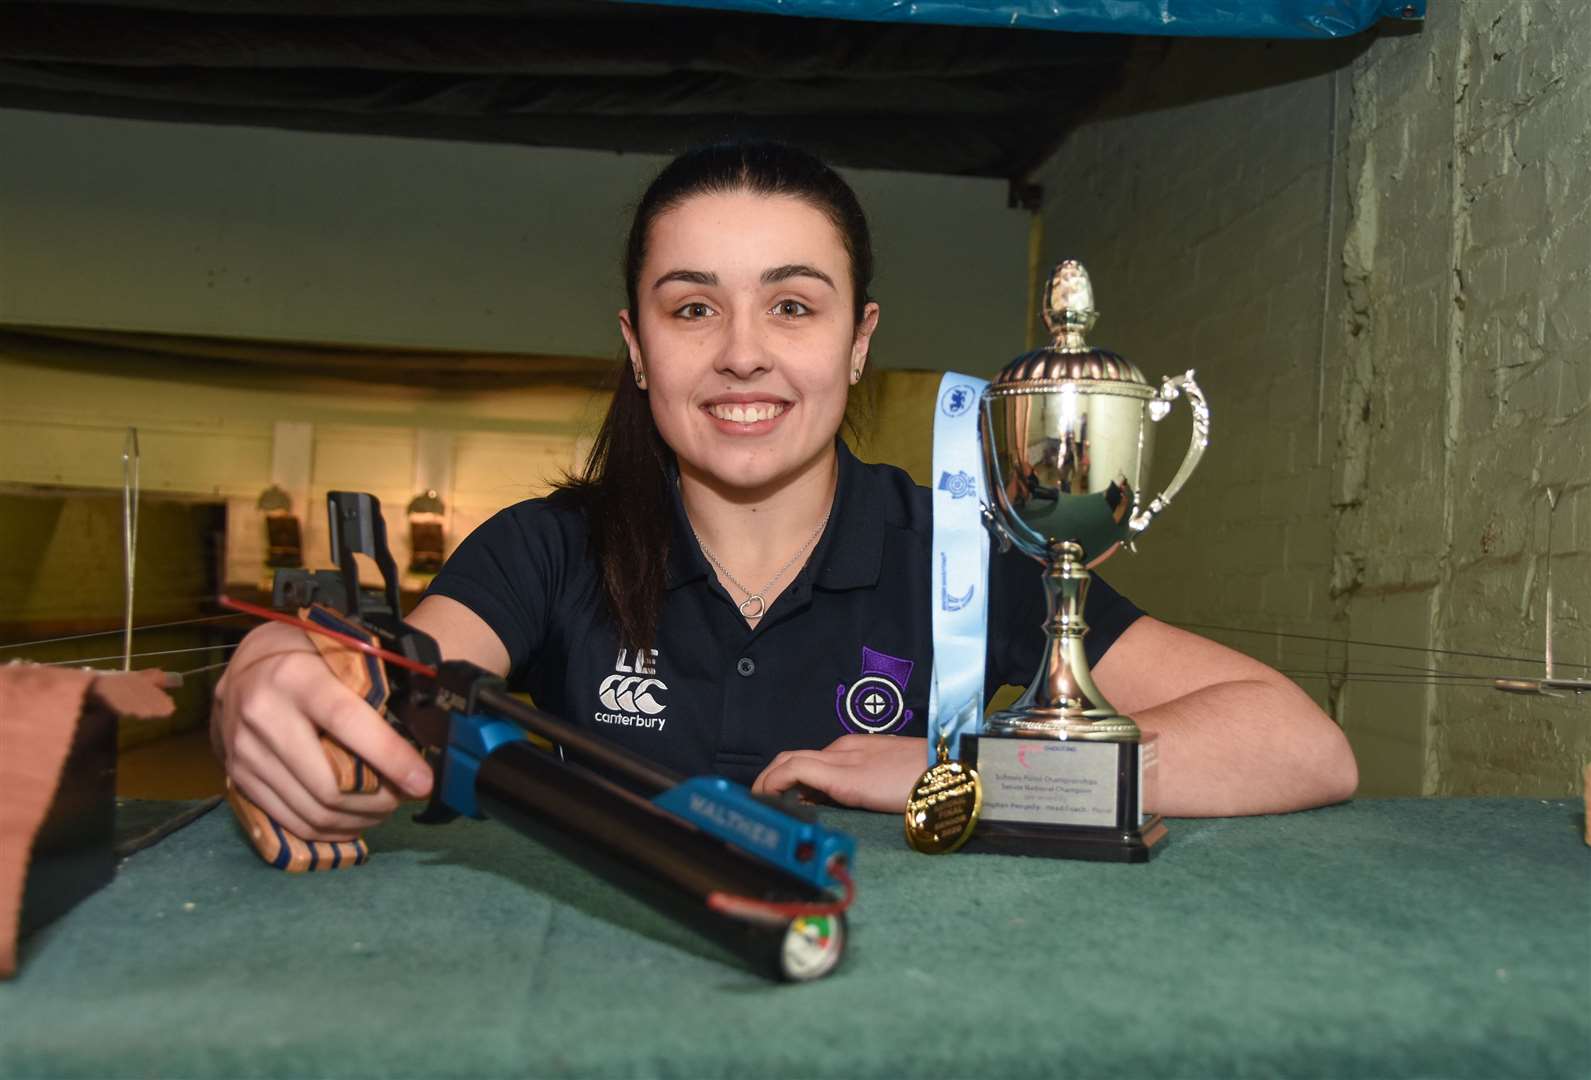 The Covid-19 lockdown couldn’t stop Lucy Evans from competing in a unique online international shooting competition on Saturday, where she finished third.